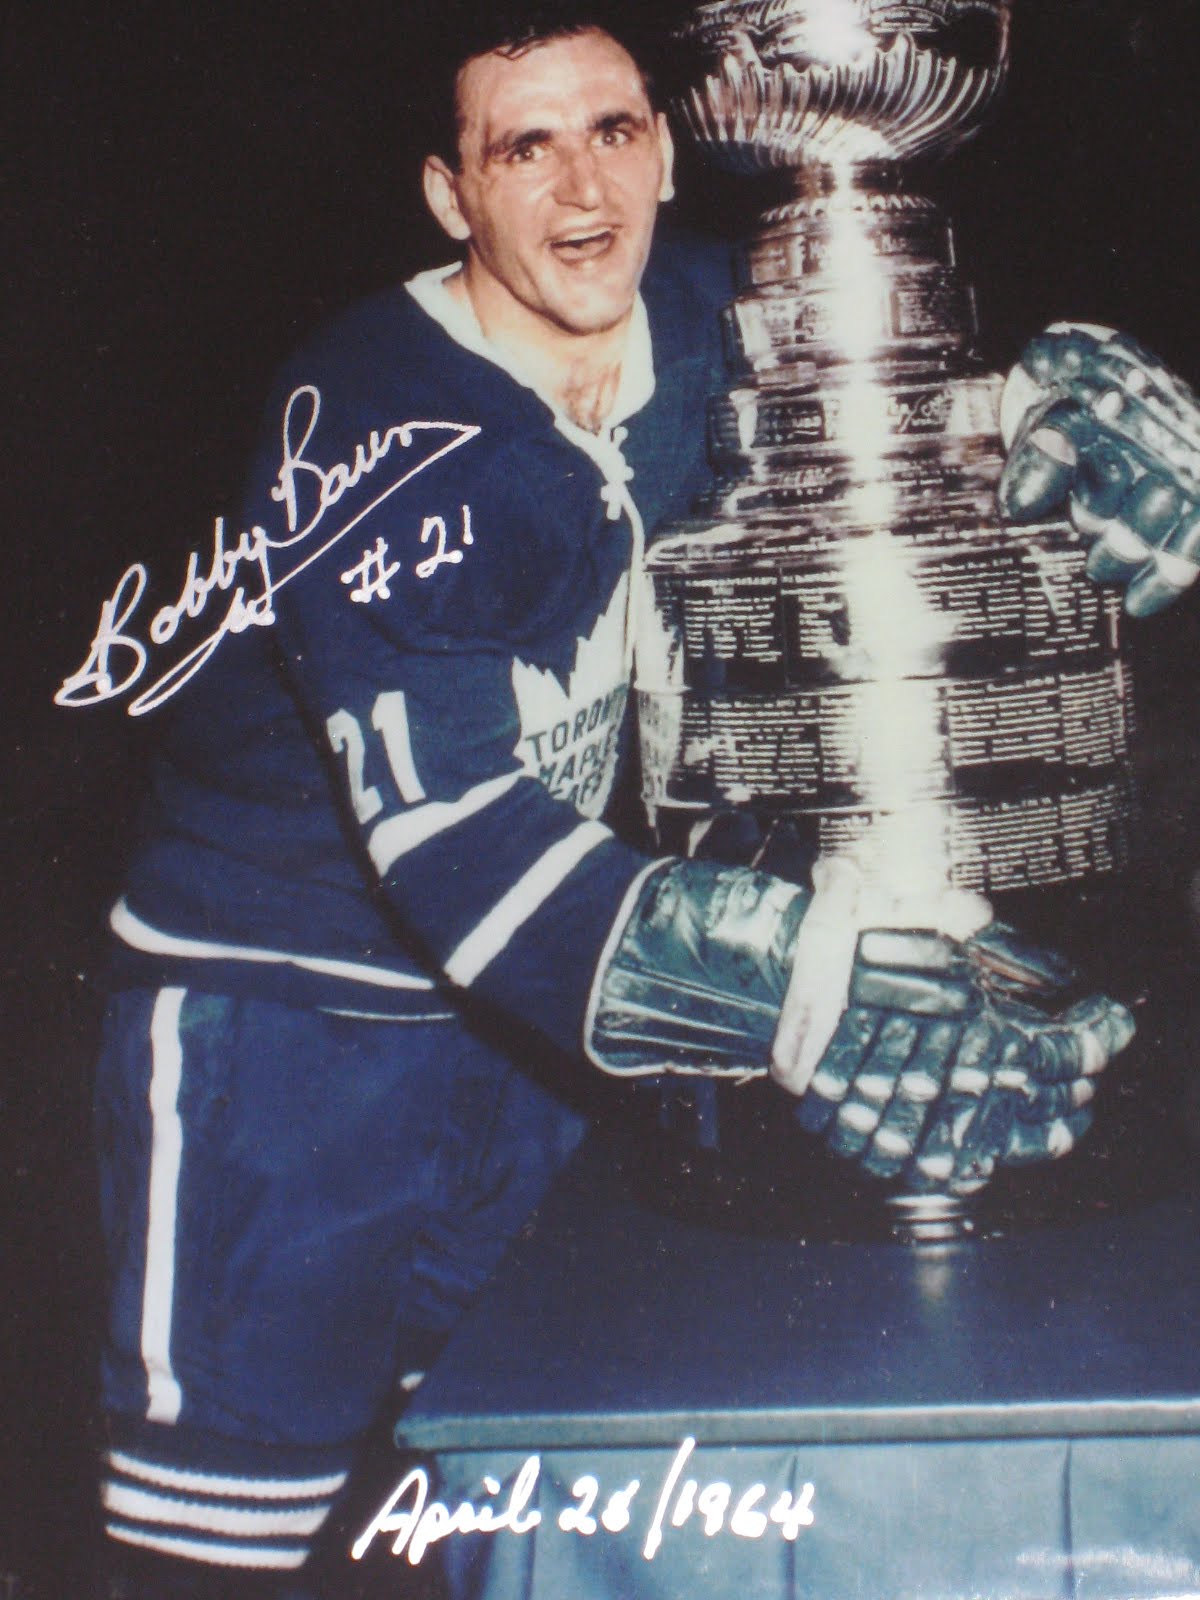 1967 Stanley Cup Maple Leafs Jersey Signed by (8) with Bob Baun